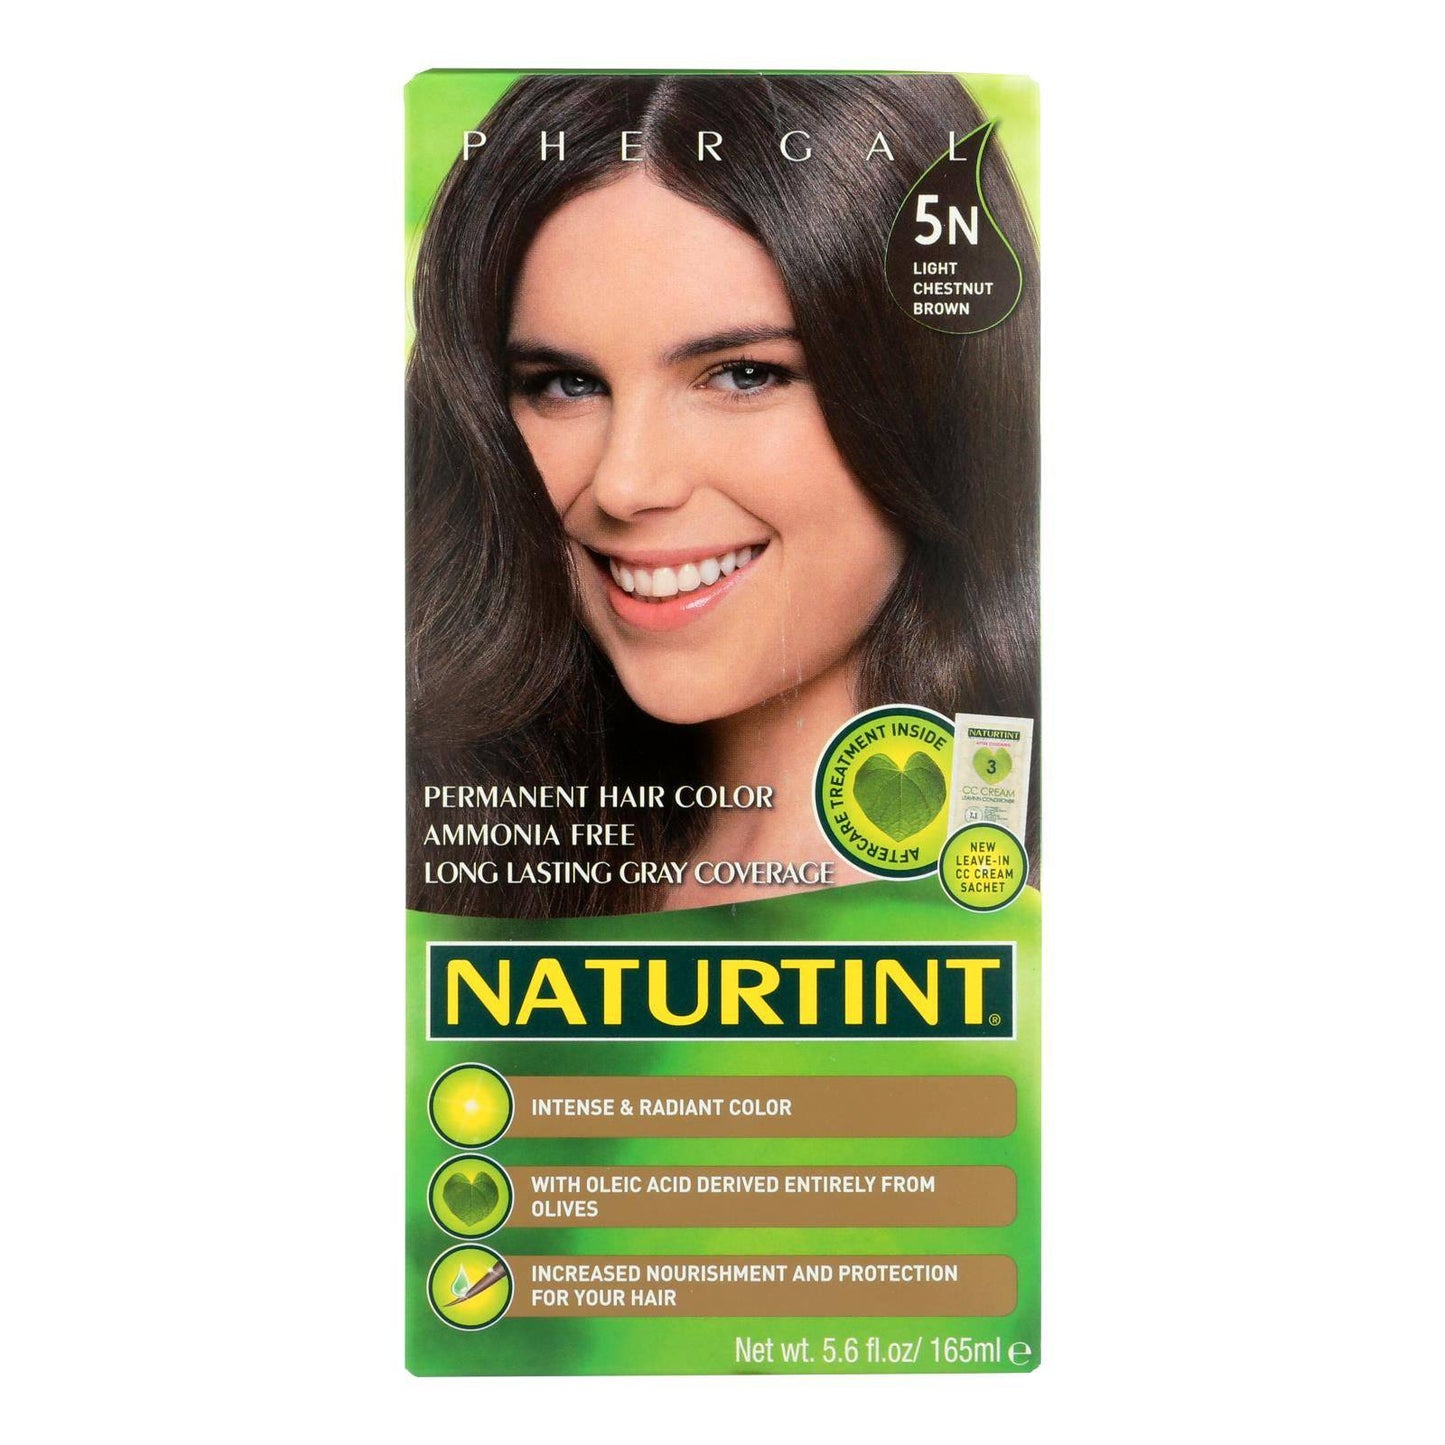 Buy Naturtint Hair Color - Permanent - 5n - Light Chestnut Brown - 5.28 Oz  at OnlyNaturals.us